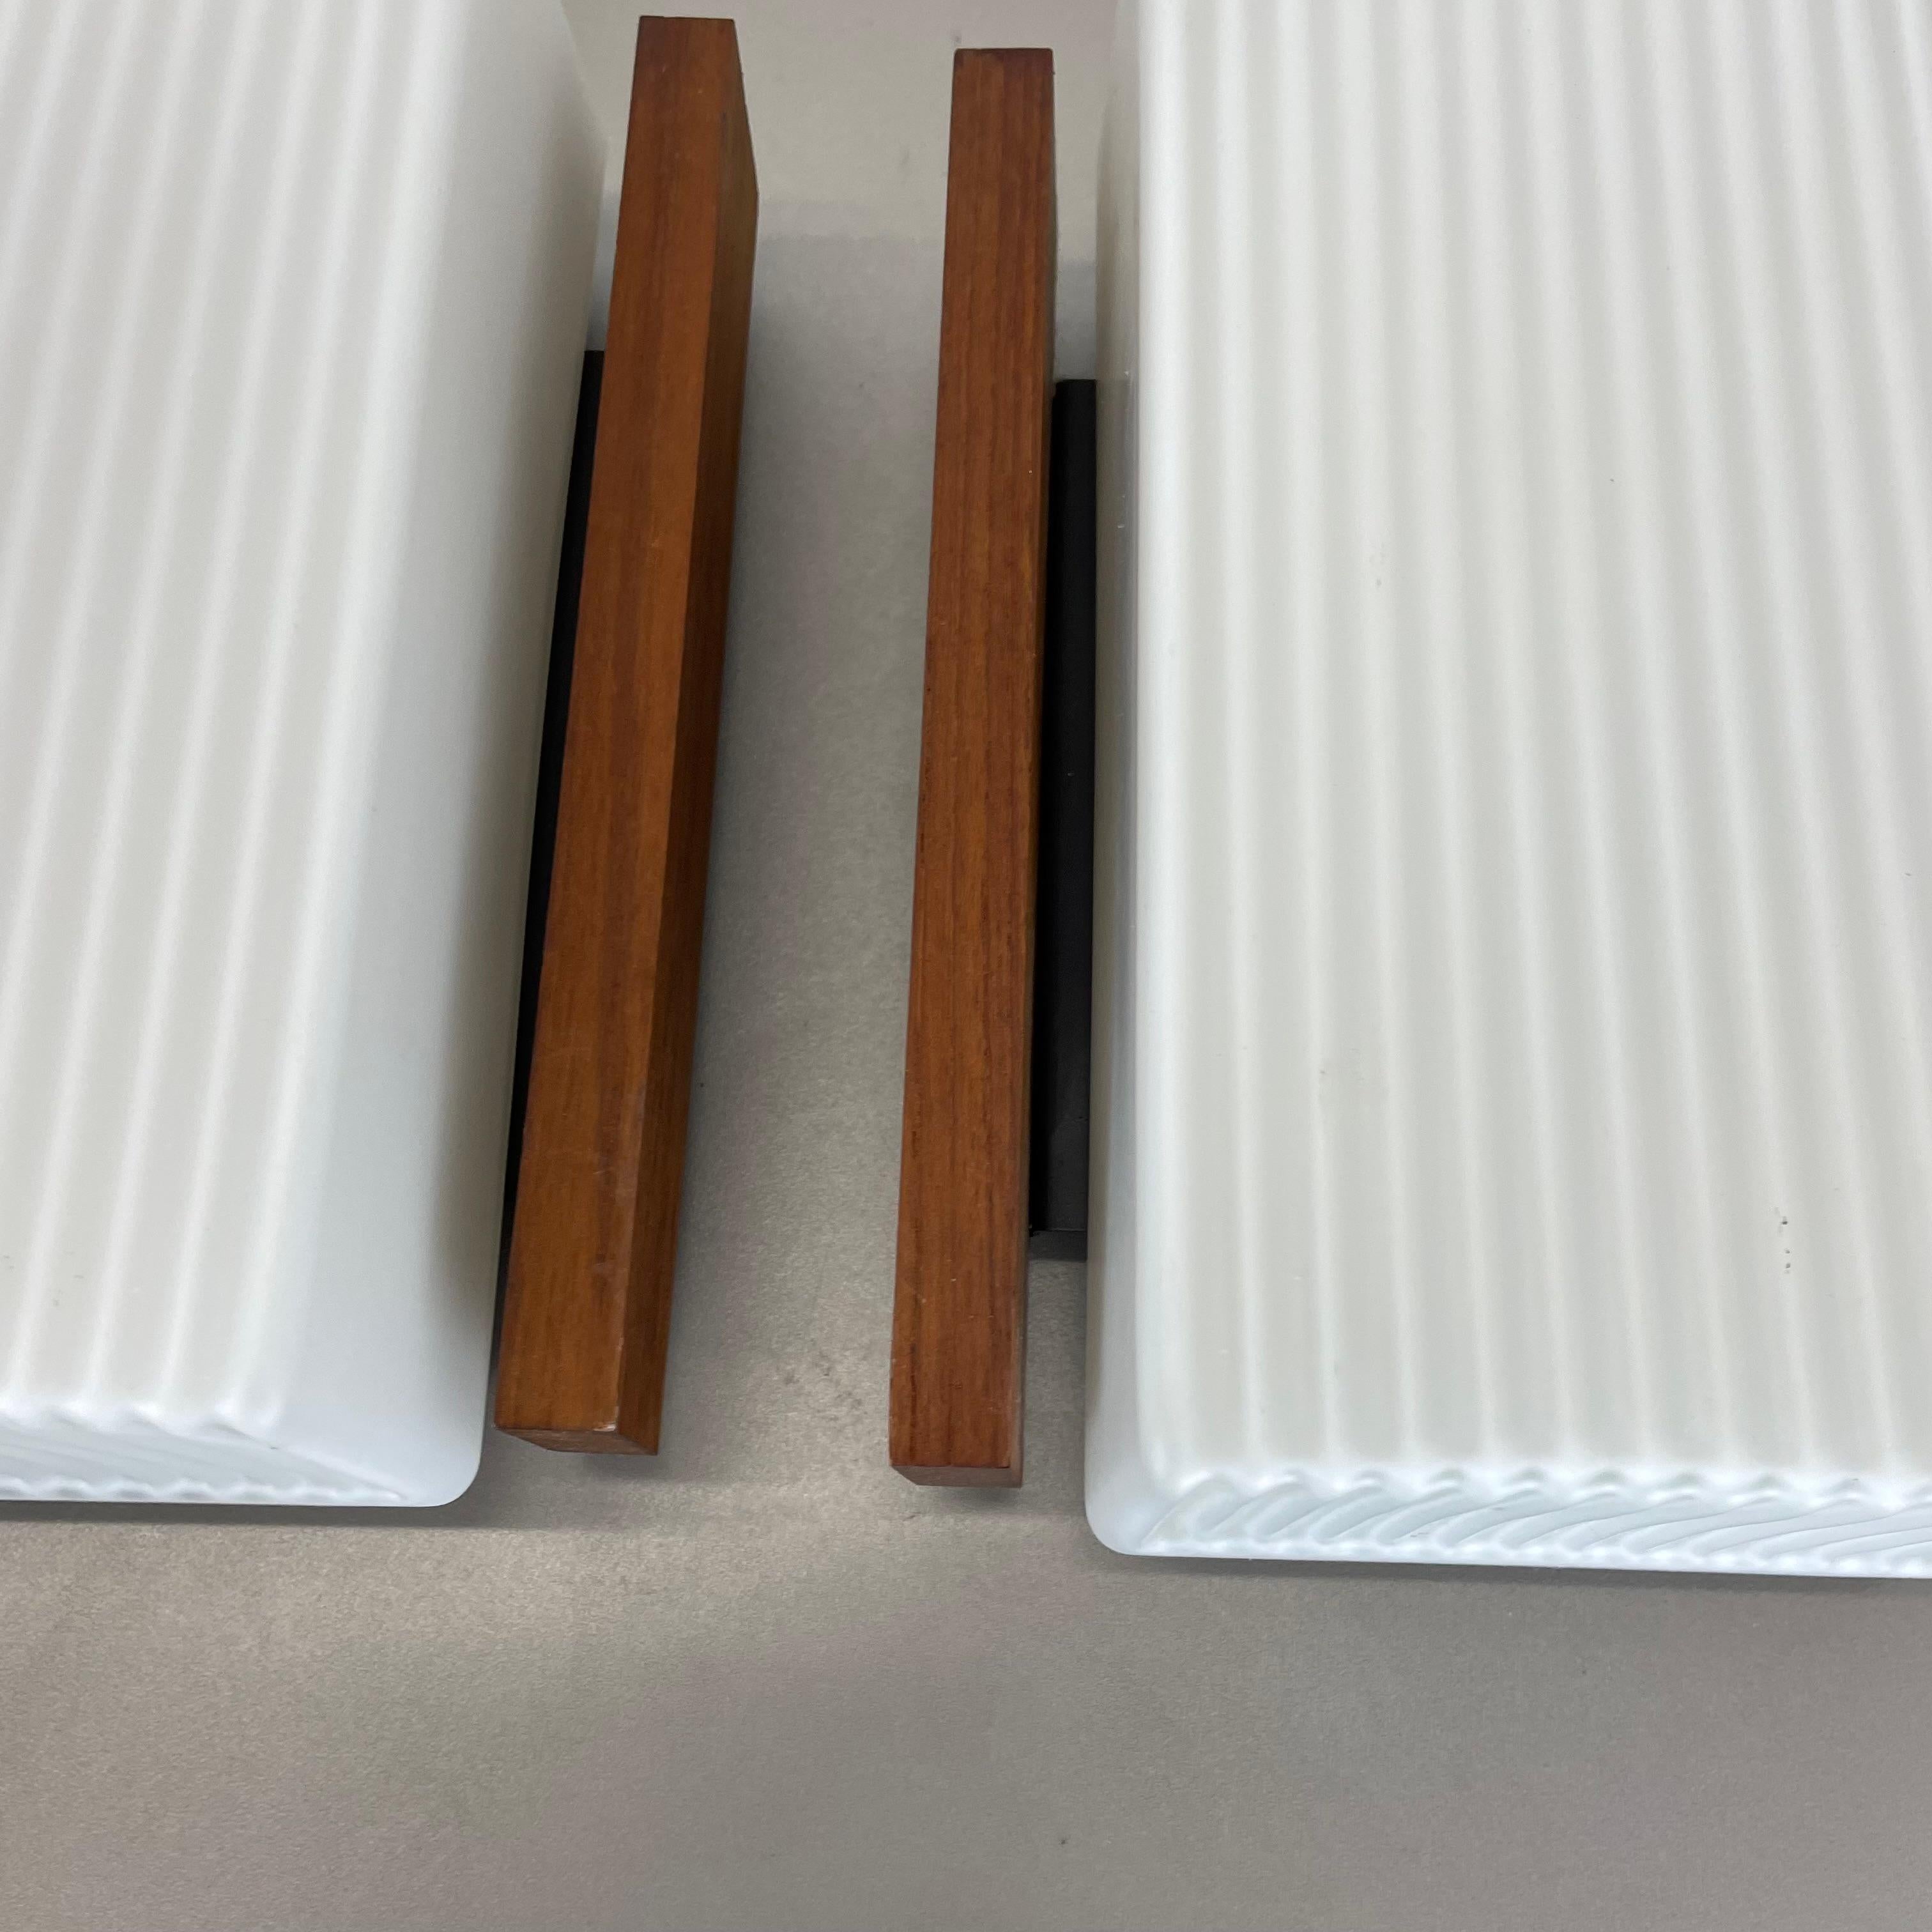 Set of 2 satin white glass and teak Wall Lights by BEGA Lights, Germany 1960s For Sale 7